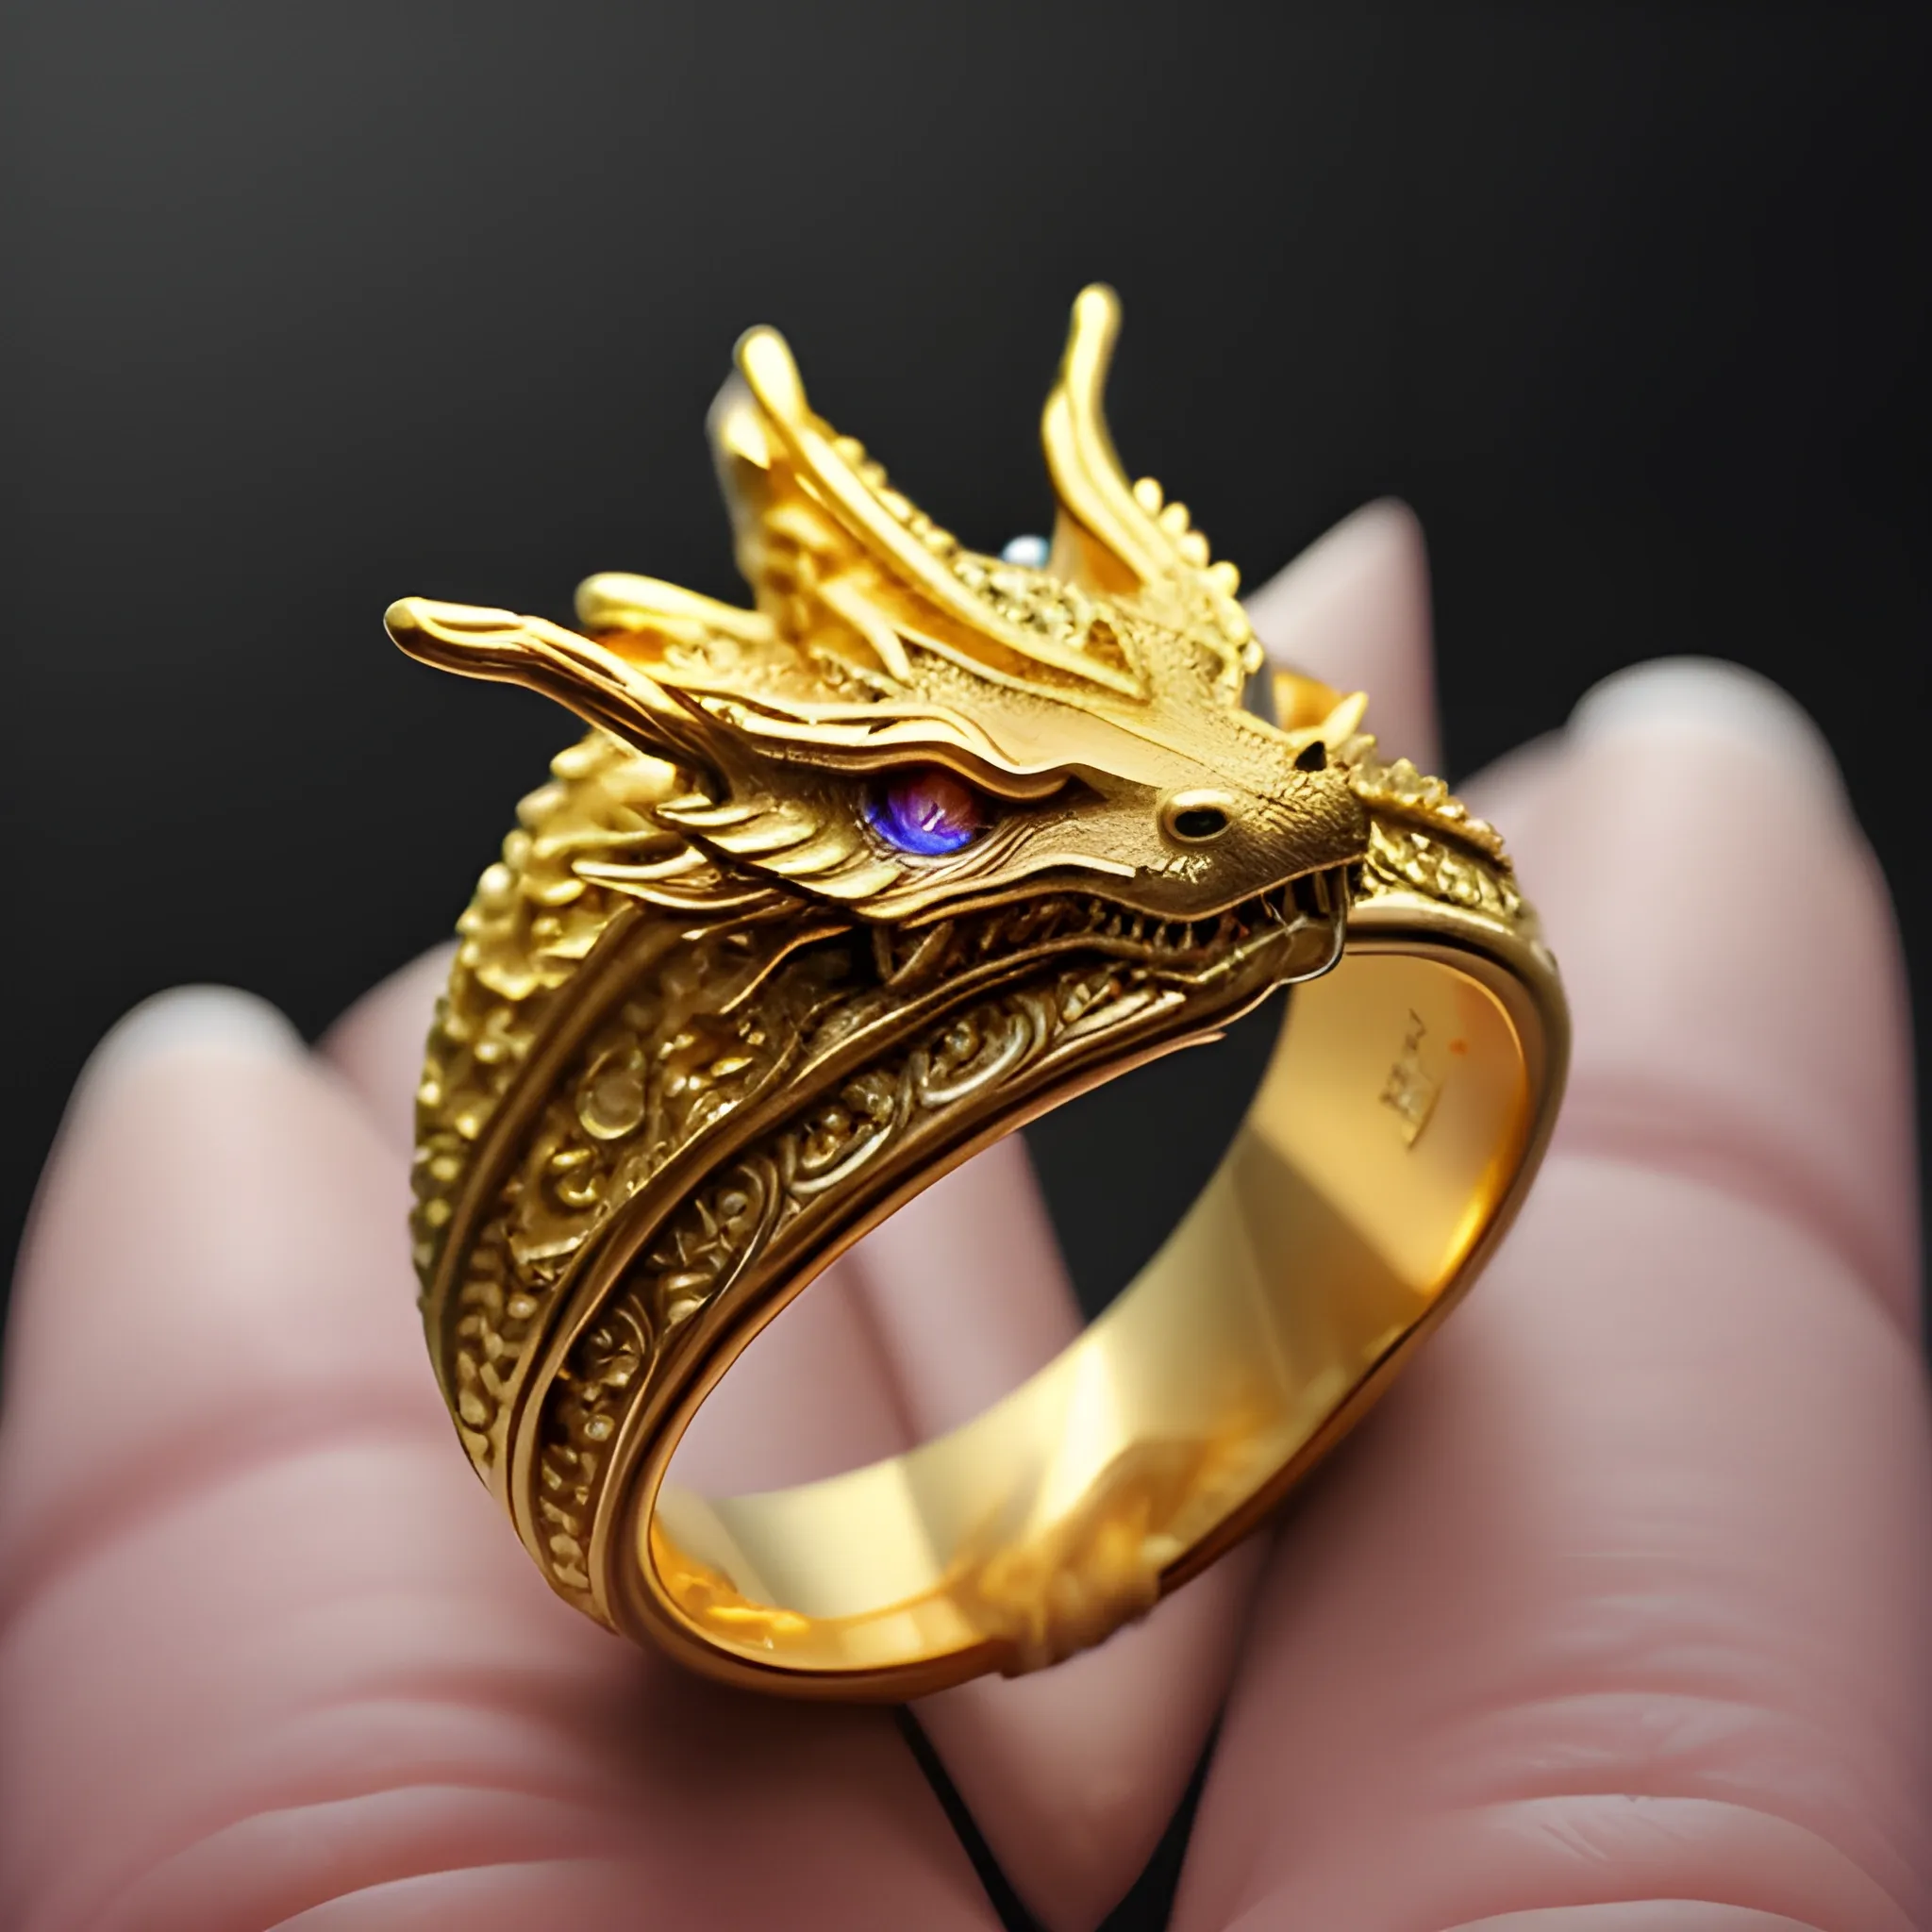 Elden Ring: How to get Dragon Hearts and Dragon Powers | Windows Central